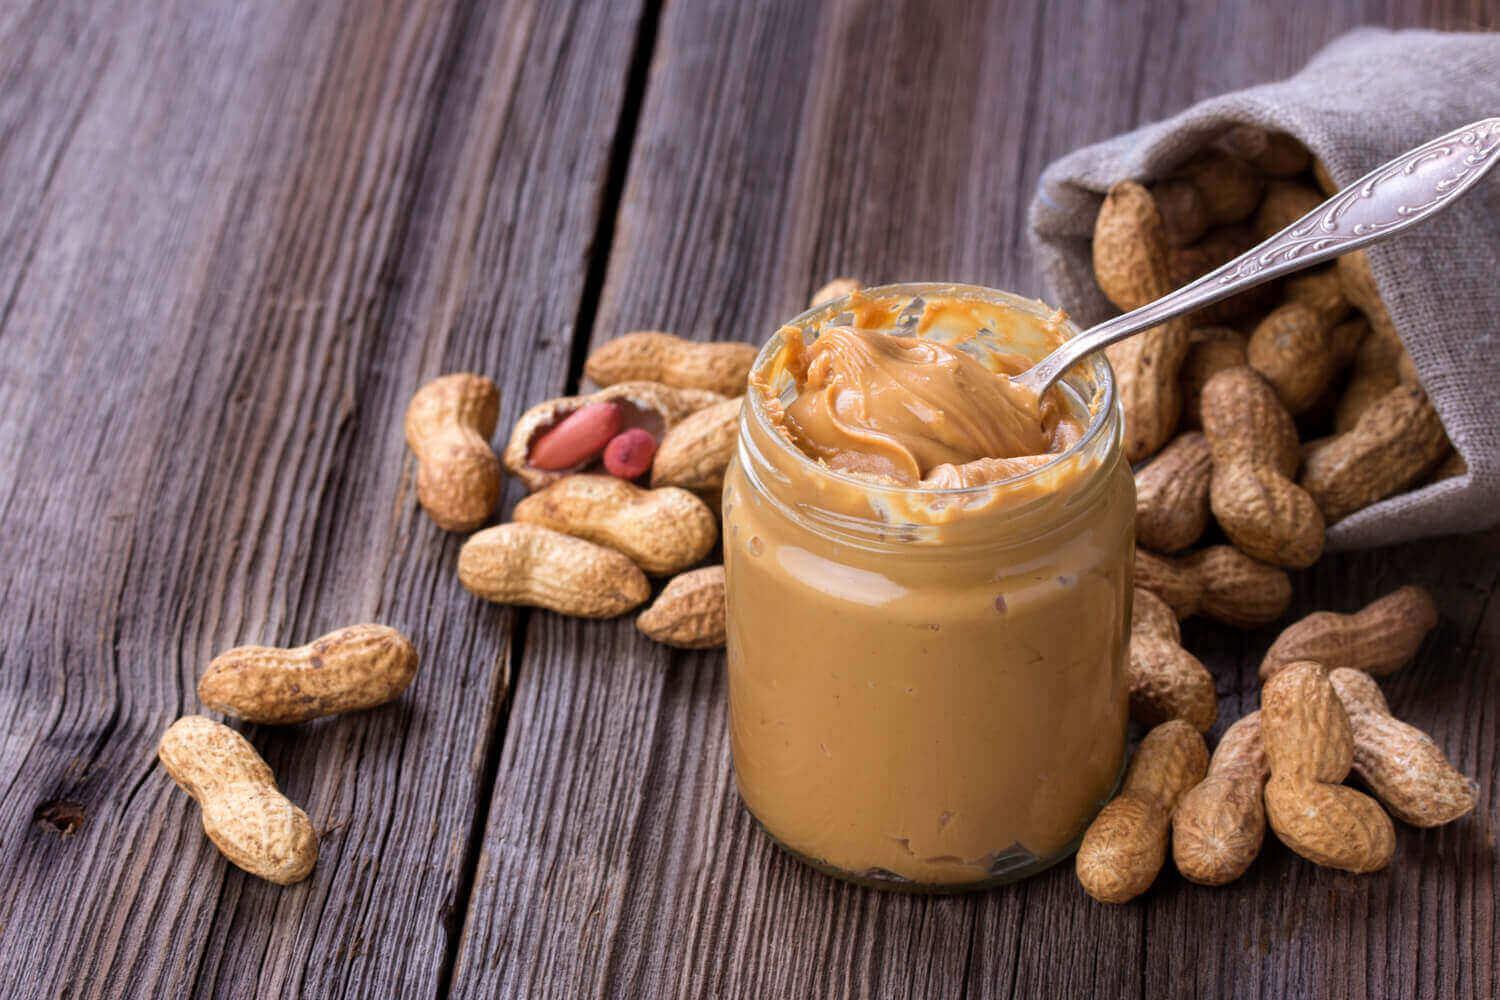 Is Peanut Butter Safe During Pregnancy? - Being The Parent